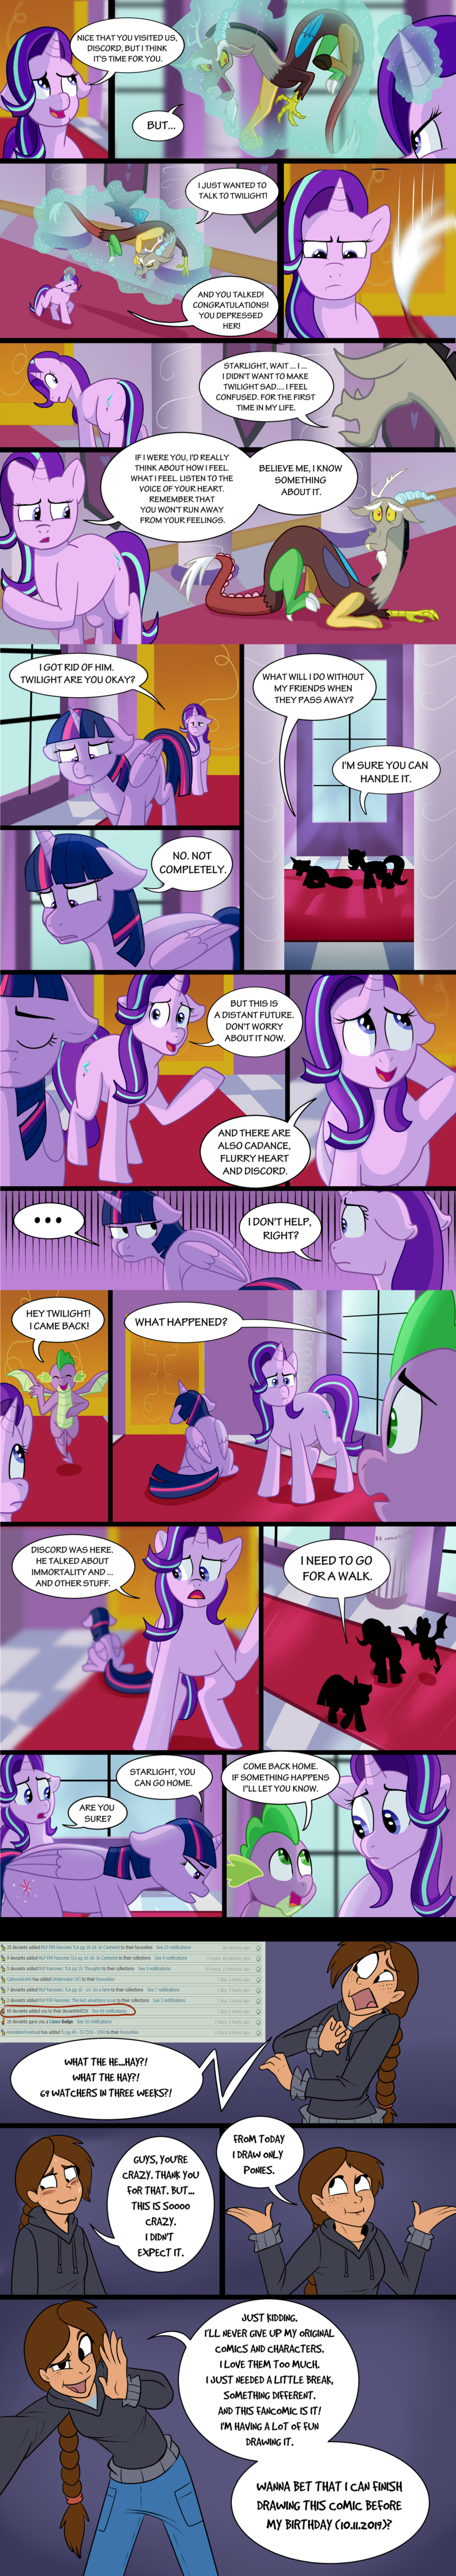 Page 19-21: In Canterlot 2/2